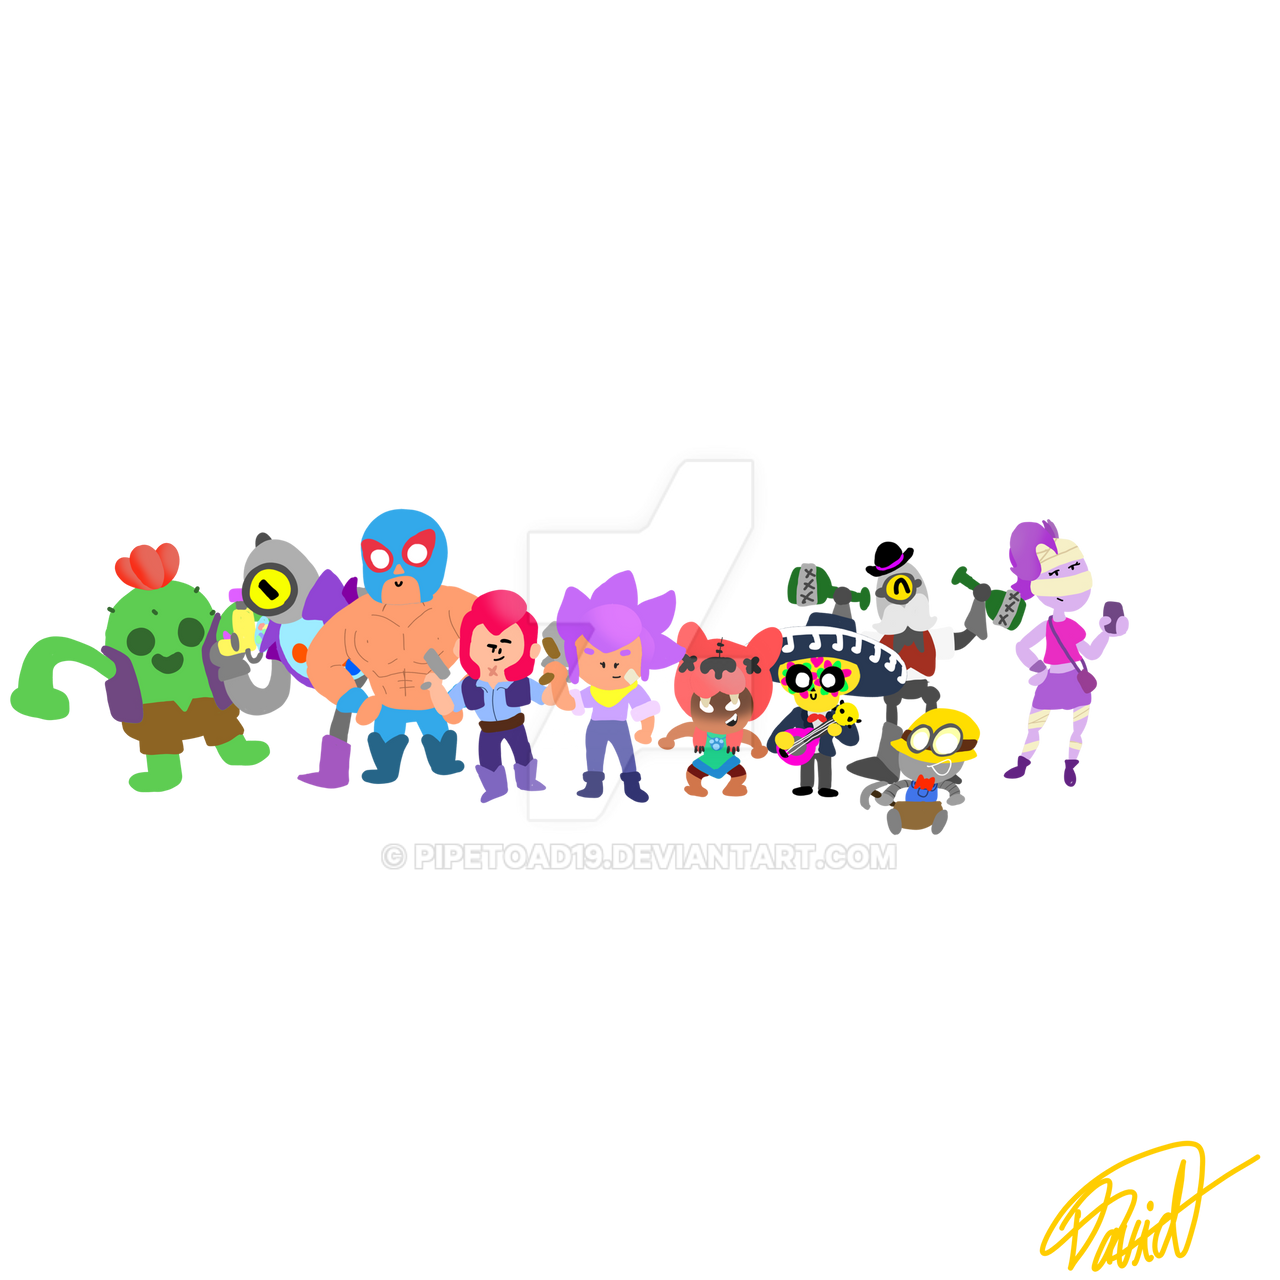 Brawl Stars 10 (spike) by Pipetoad19 on DeviantArt